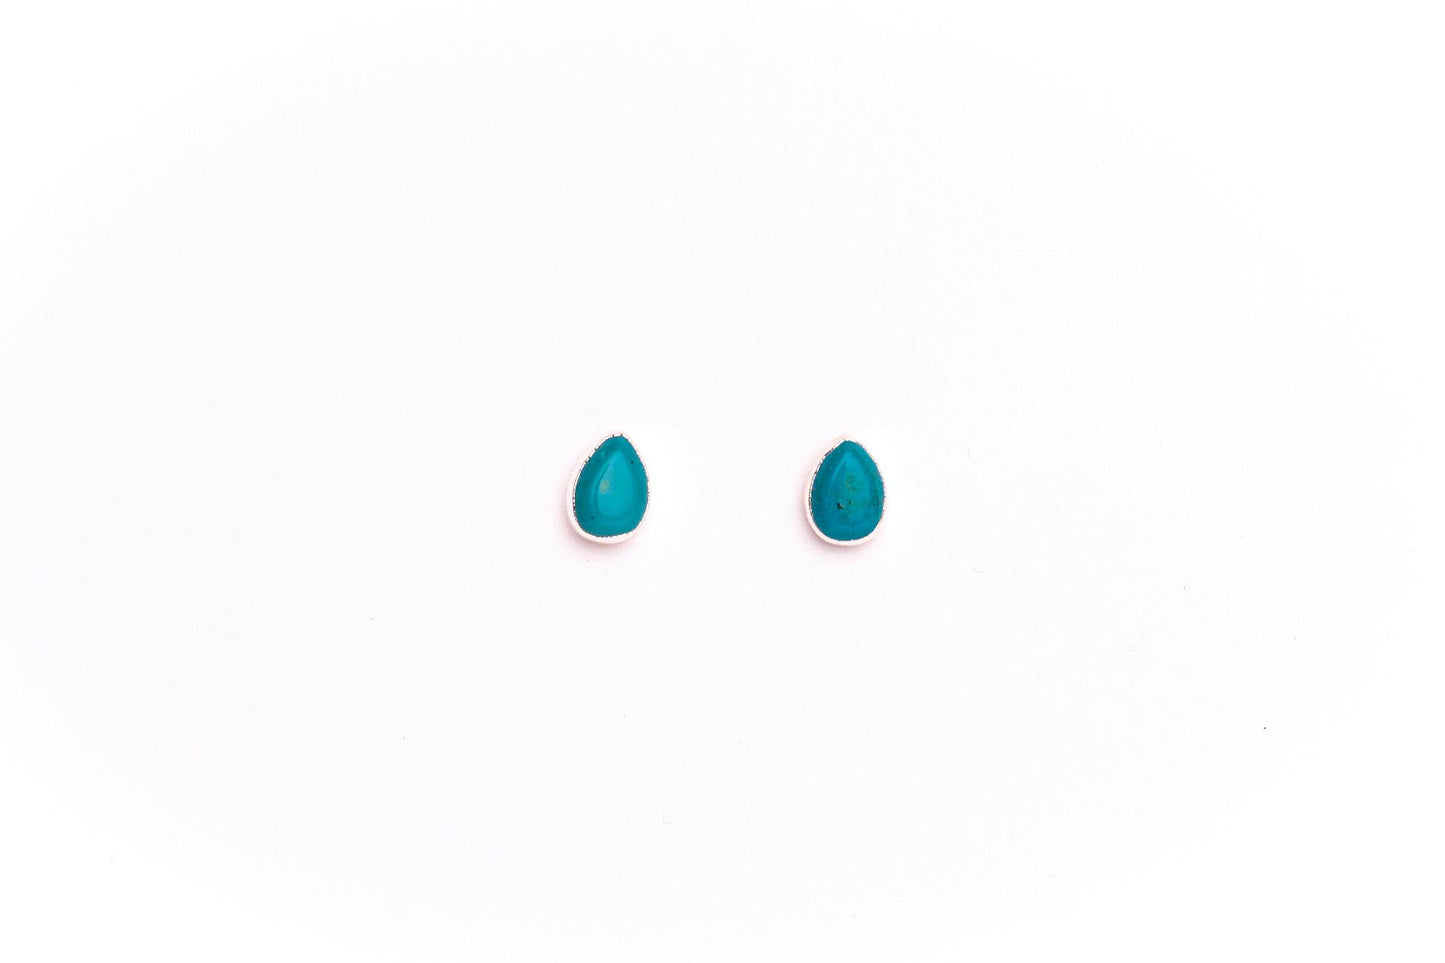 Burnished Silver Teardrop Stud Earring w/ Inlayed Turquoise